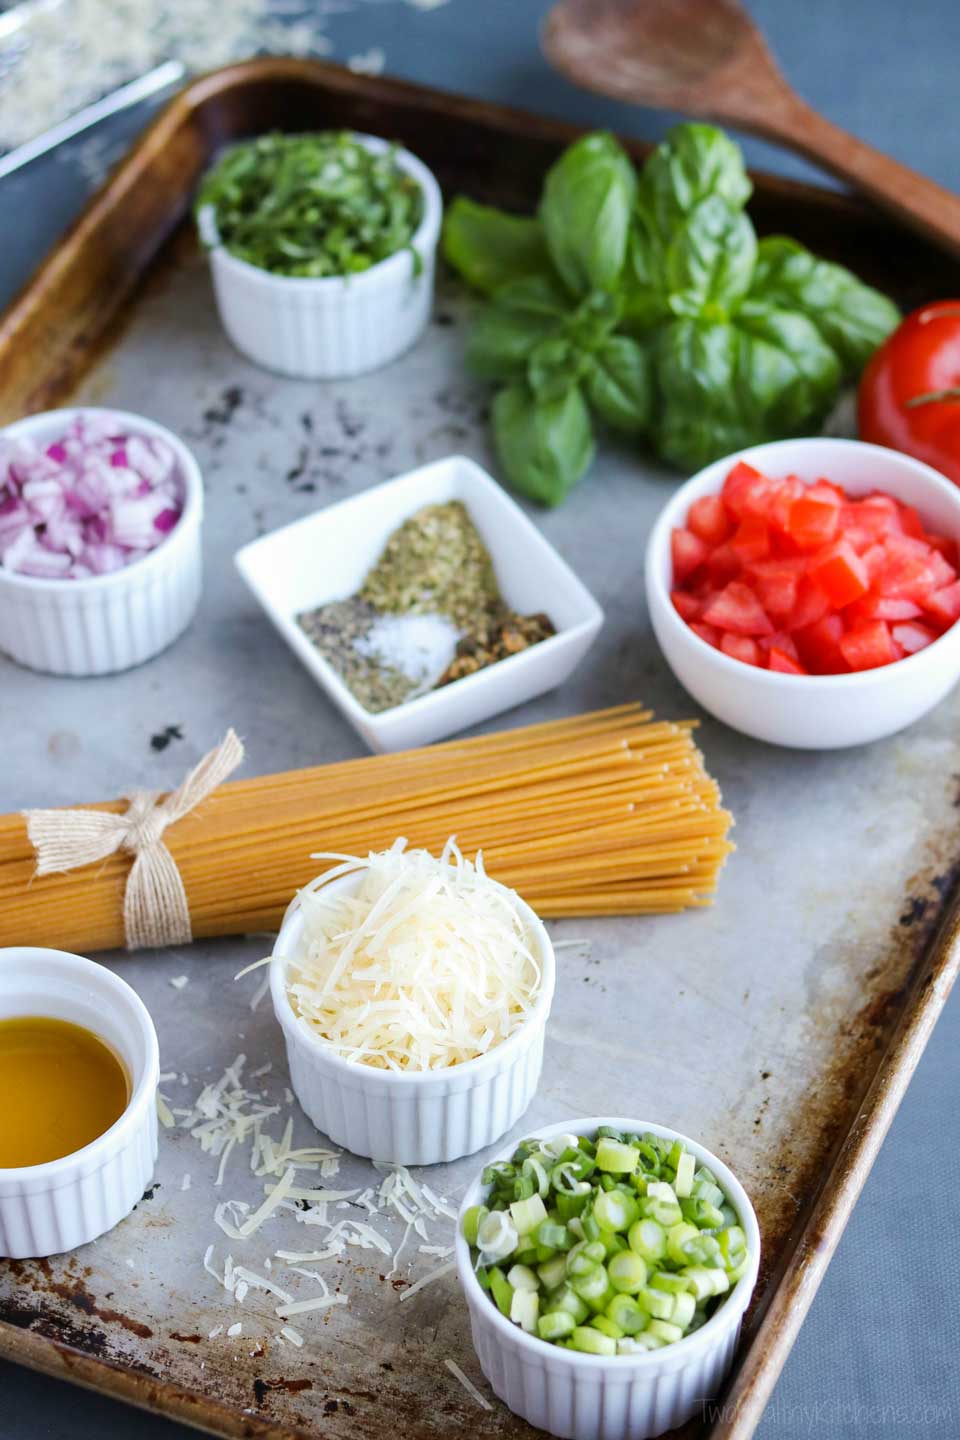 Want to cook like a chef? Want to meal plan better and be quicker in the kitchen? Mastering the idea of mise en place is key! It can be helpful to keep all your ingredients in prep bowls on a movable sheet pan, so your prep station can move around the kitchen wherever it’s needed.